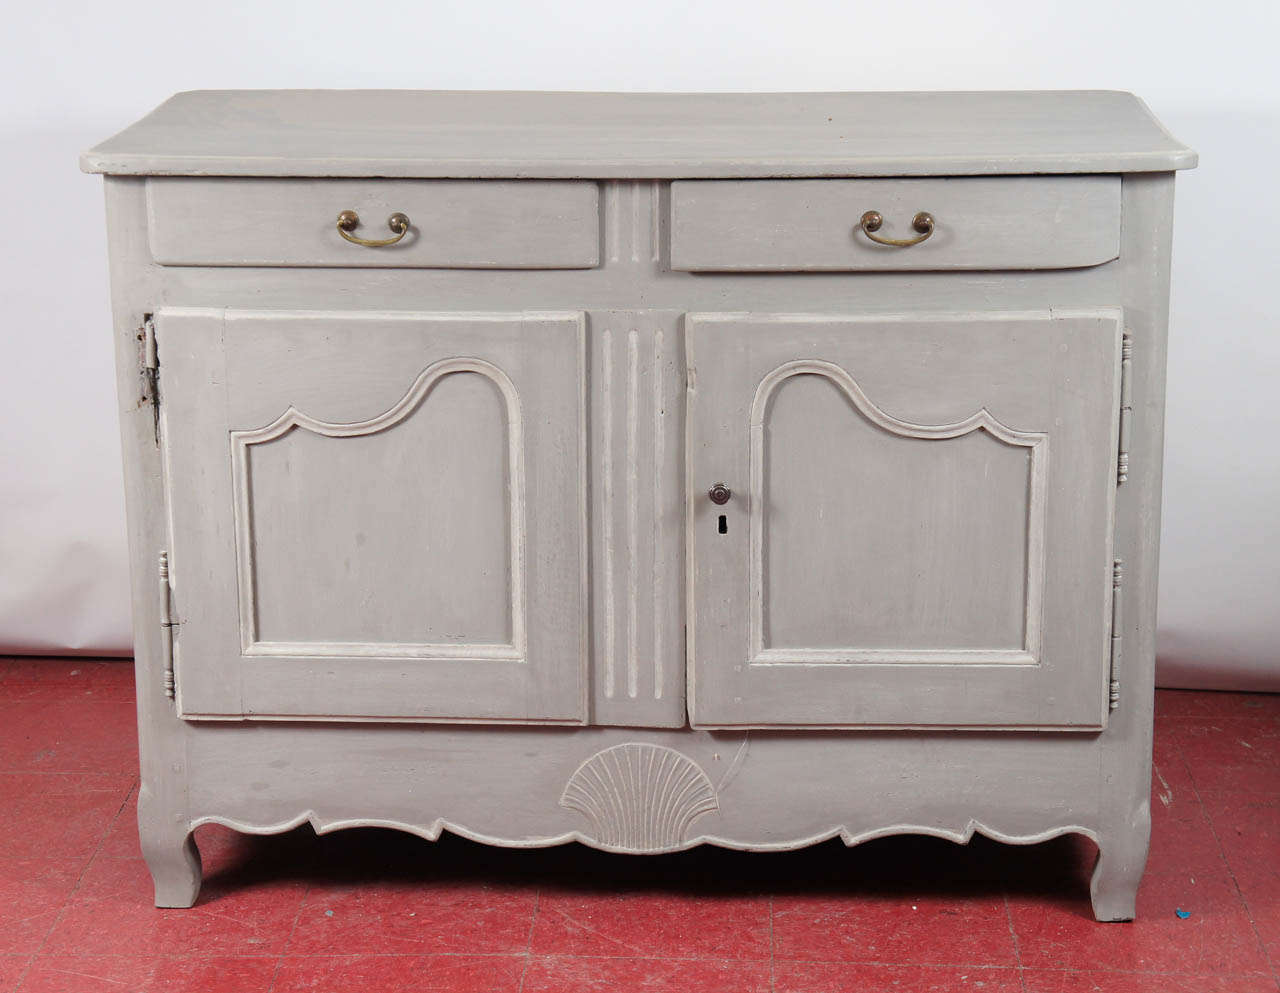 19th century Louis XV French painted buffet server. Can be used in a Swedish Gustavian setting as well. Light grey wash finish, brass handles, pewter knob. Bottom has one shelf.